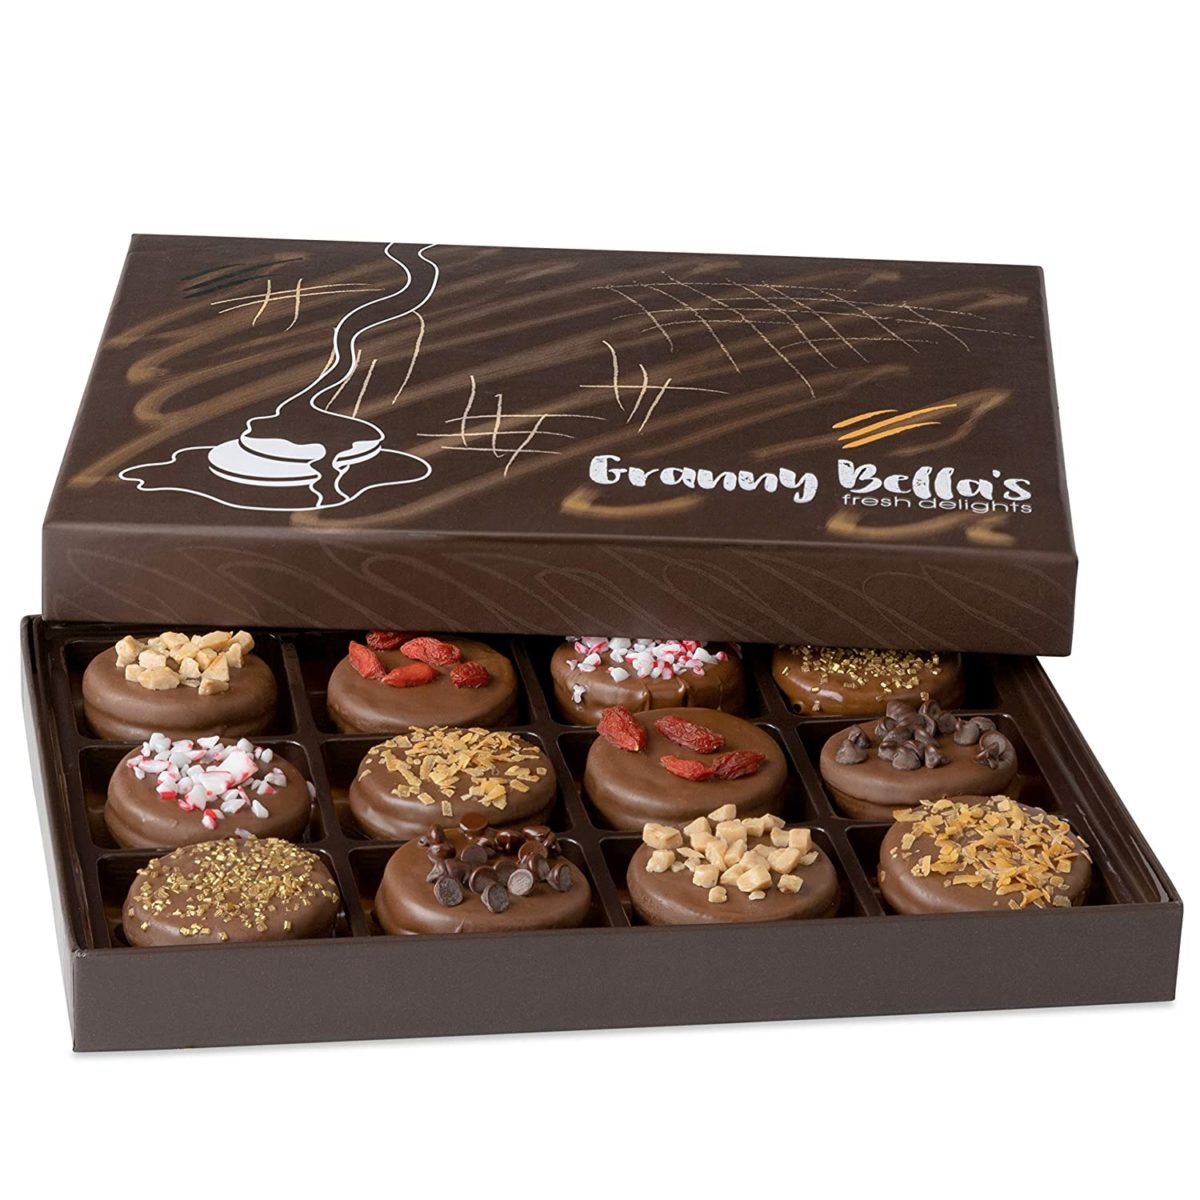 calling all chocolate lovers, here are 15 edible gifts you can give during the holidays